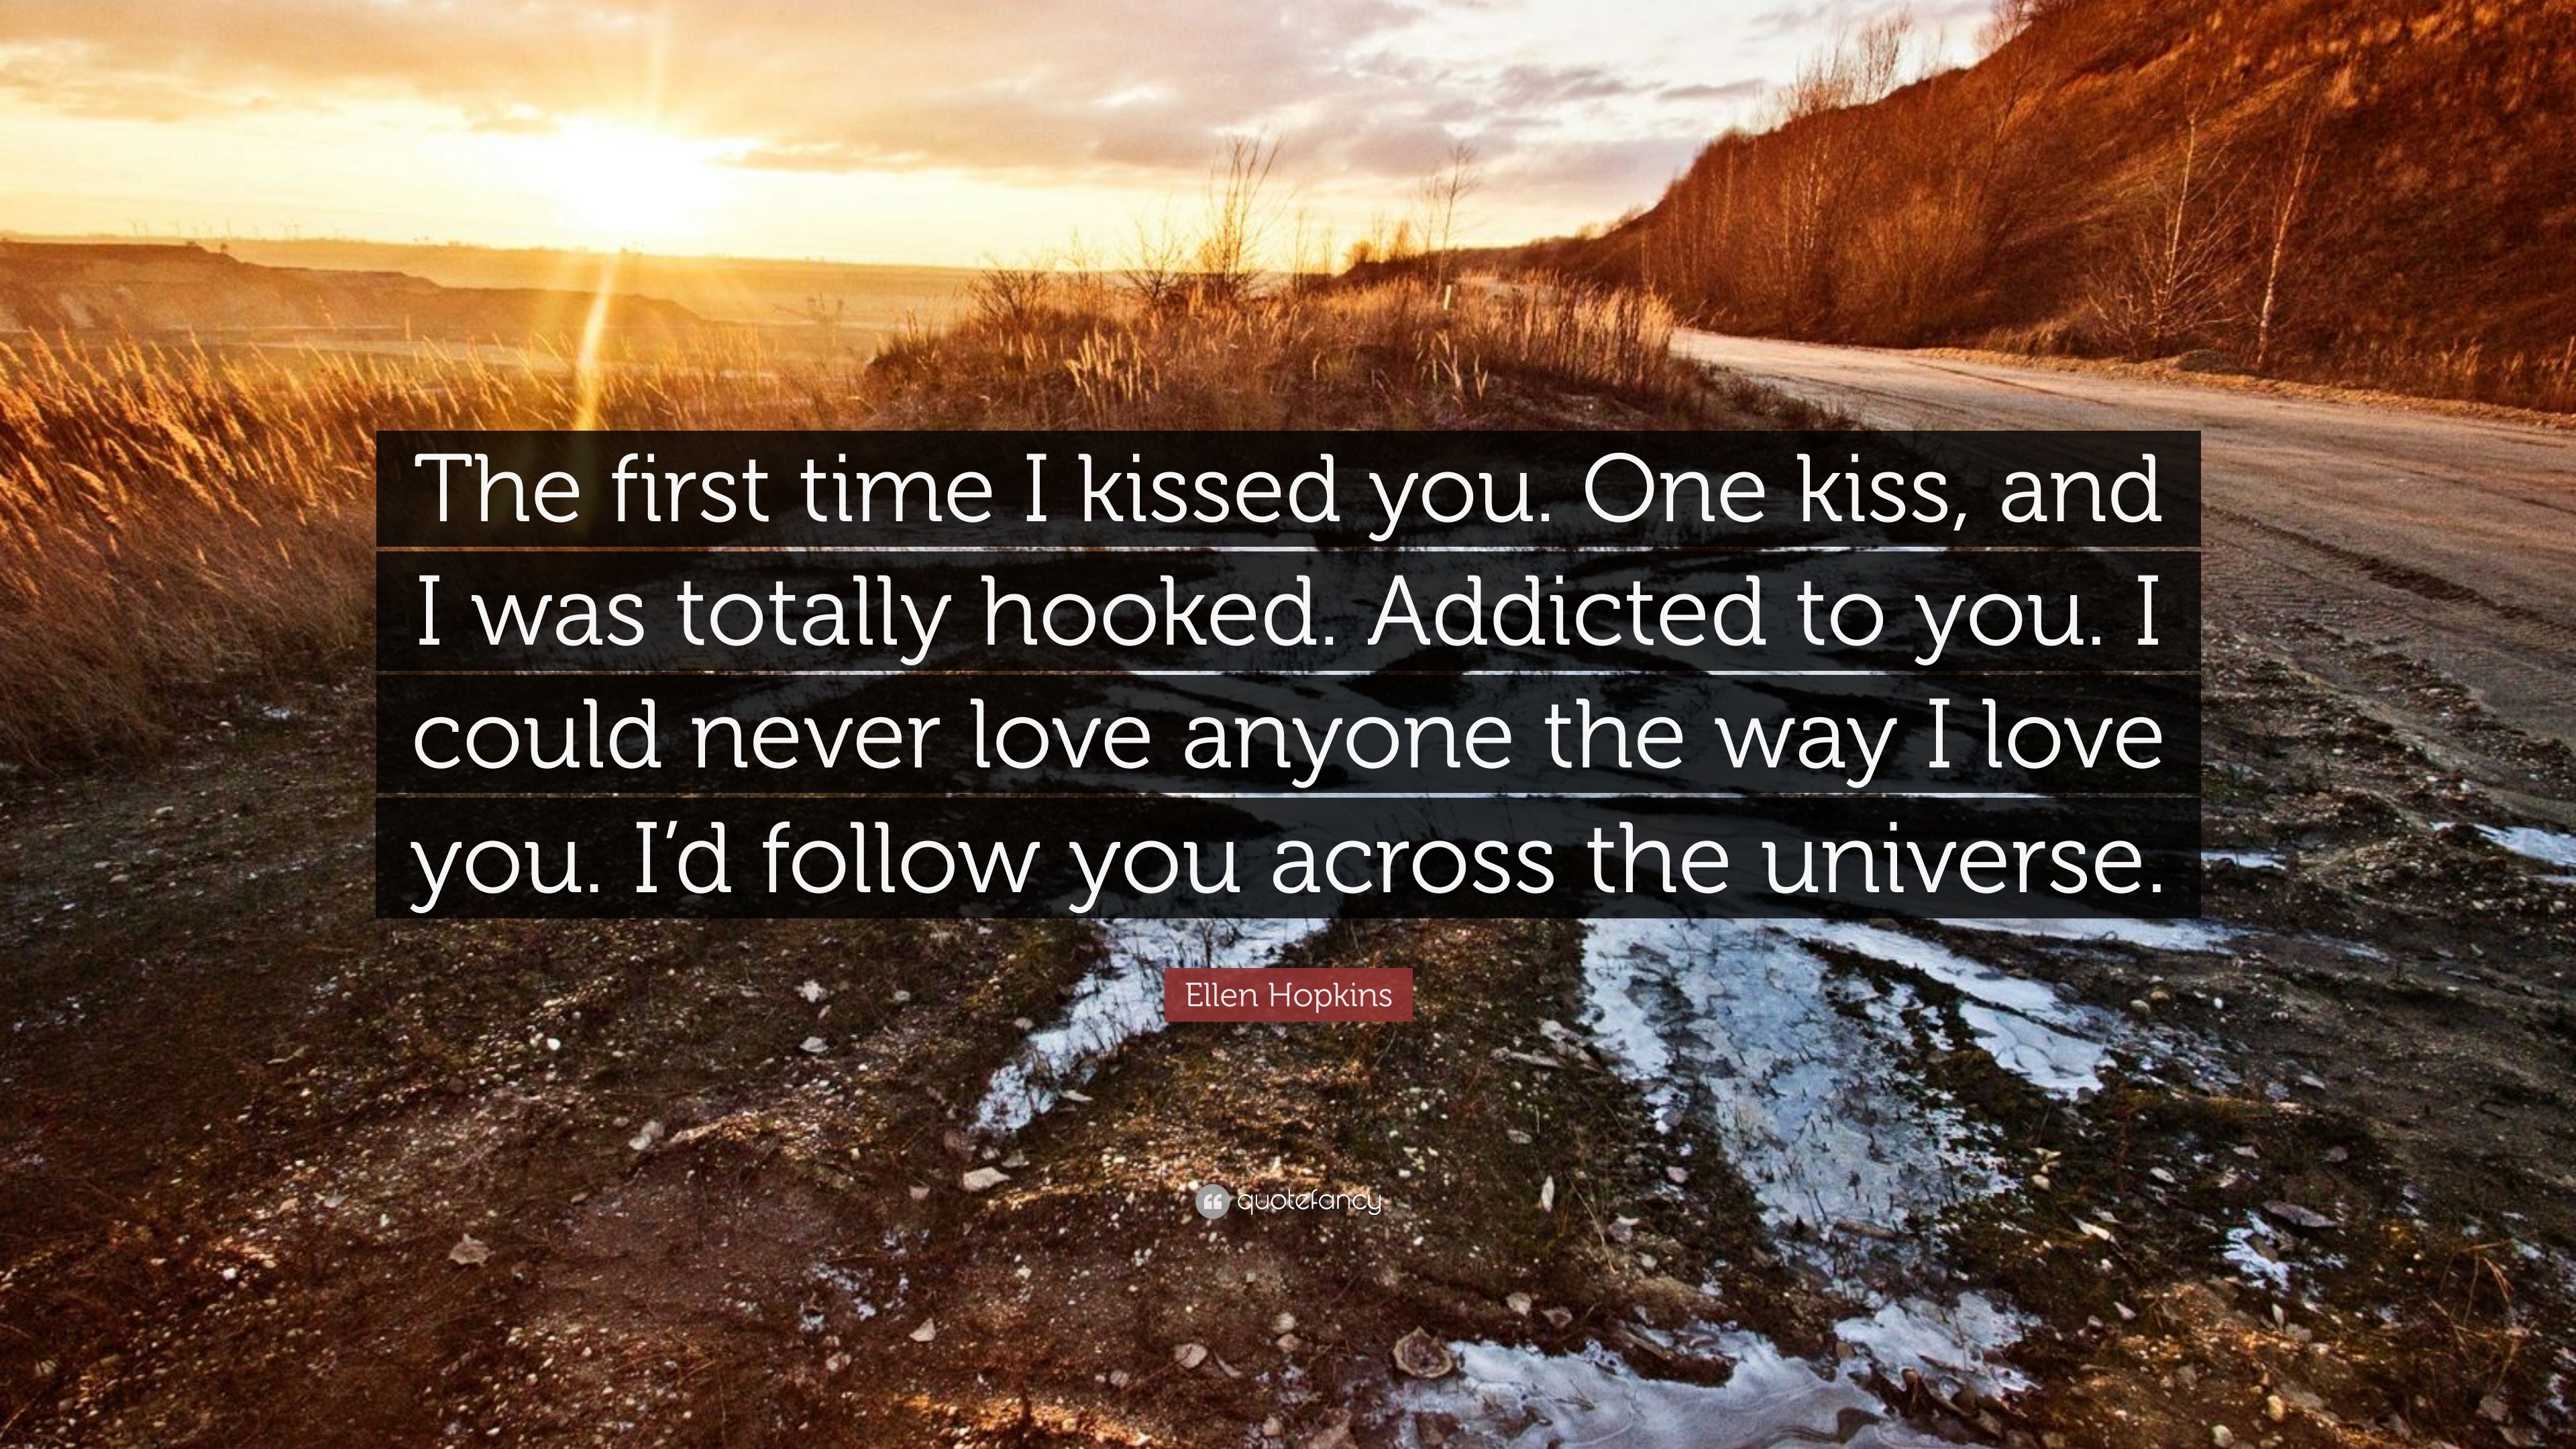 Ellen Hopkins Quote “The first time I kissed you e kiss and